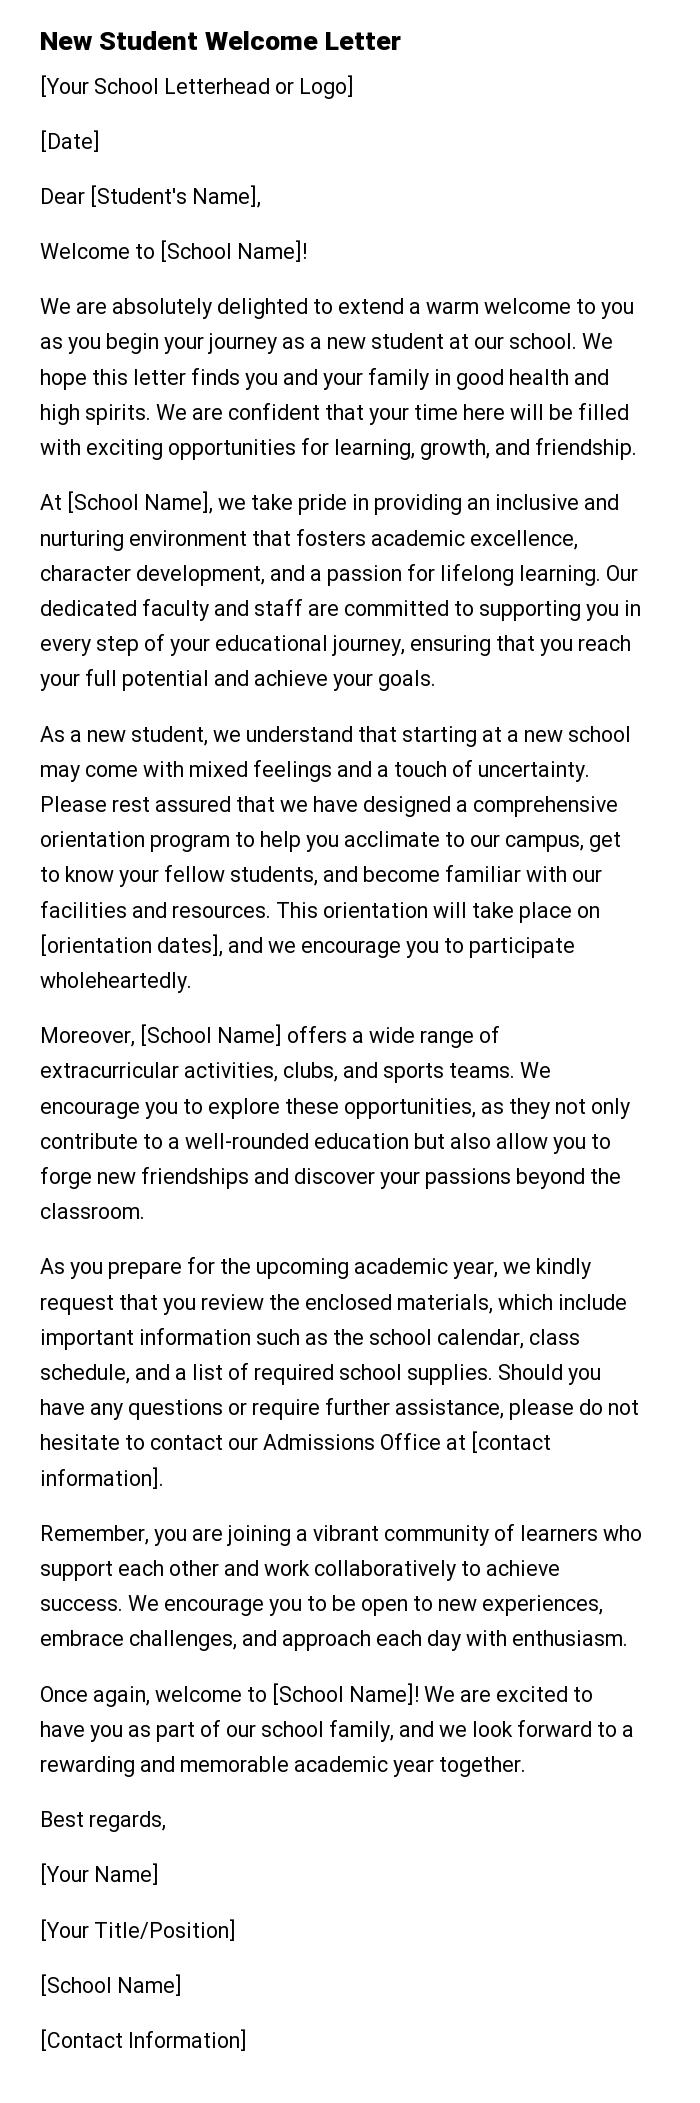 New Student Welcome Letter